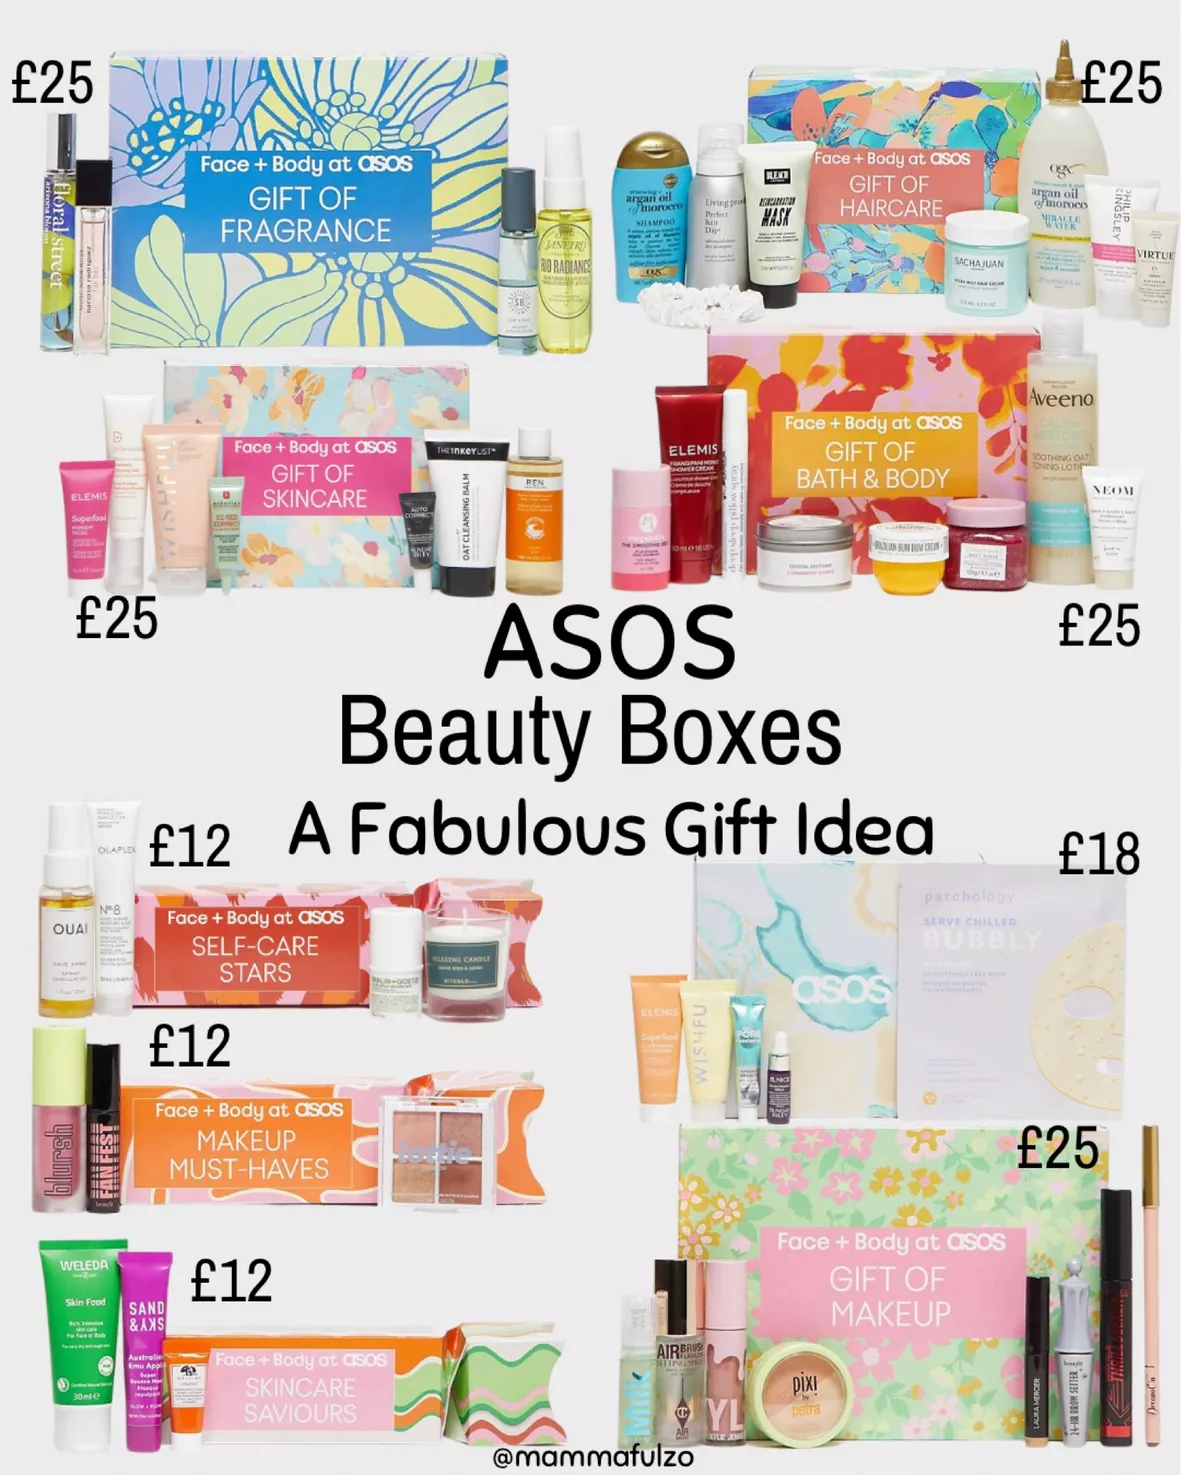 Why a Skincare Box is the Ideal Gift for Women Under 30?